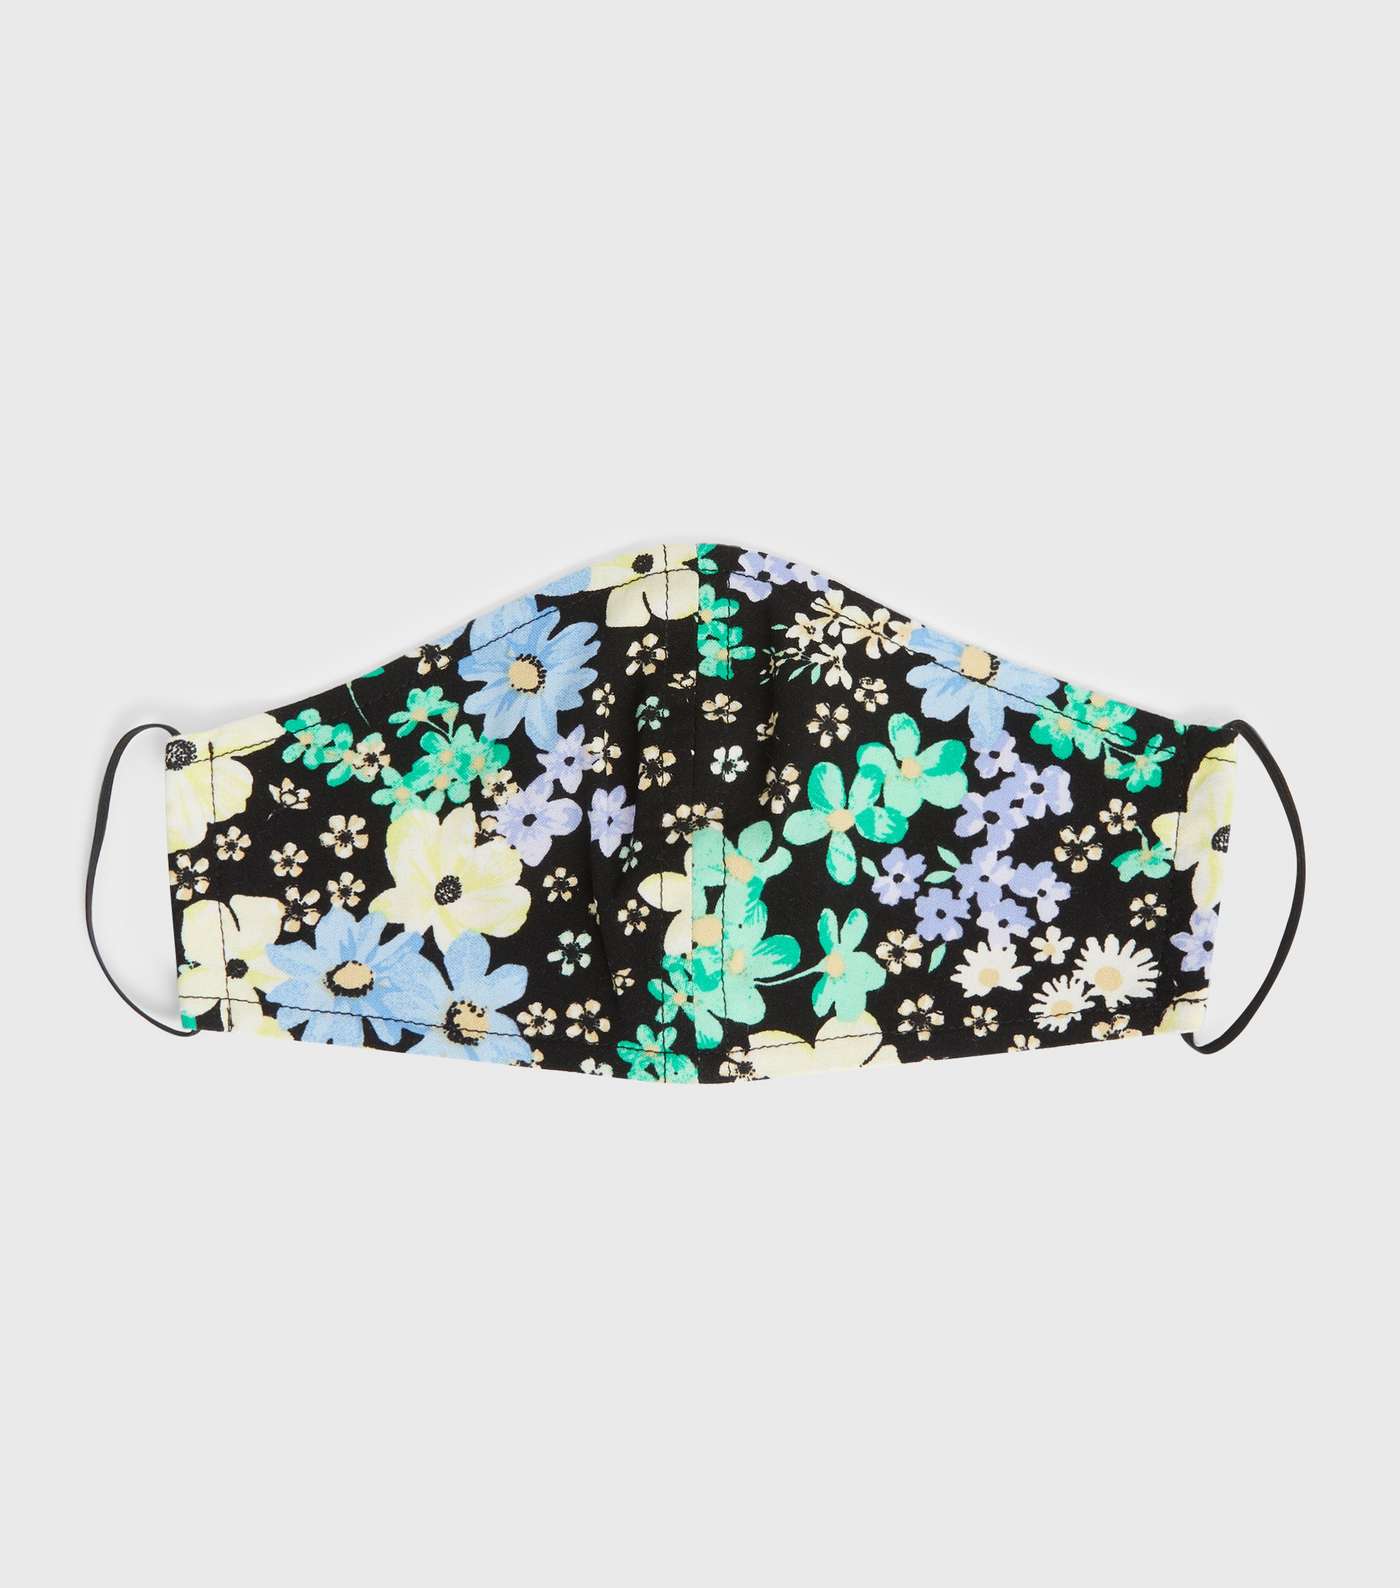 Black and Blue Floral Reusable Face Covering Image 2